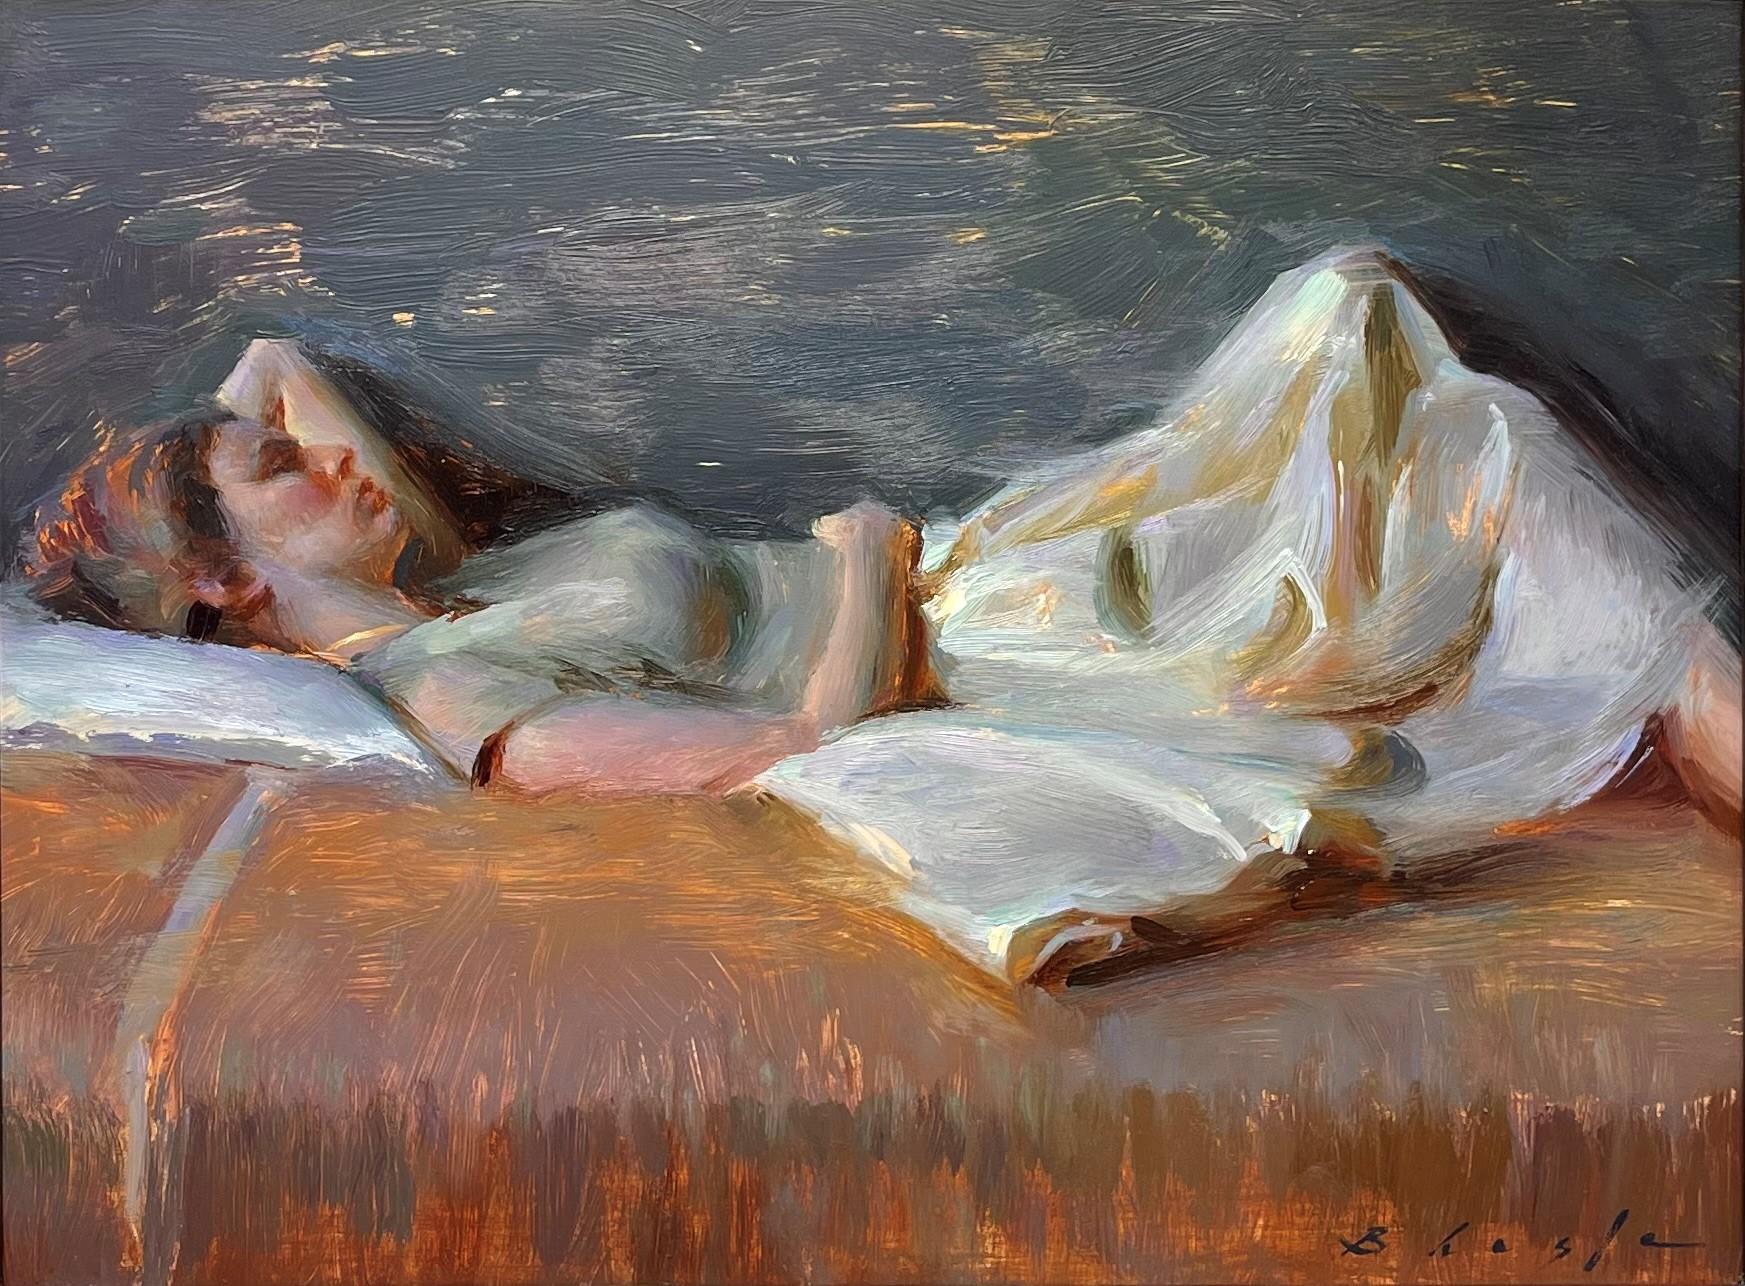 Suchitra Bhosle Portrait Painting - "Repose in Viridian" Oil Painting